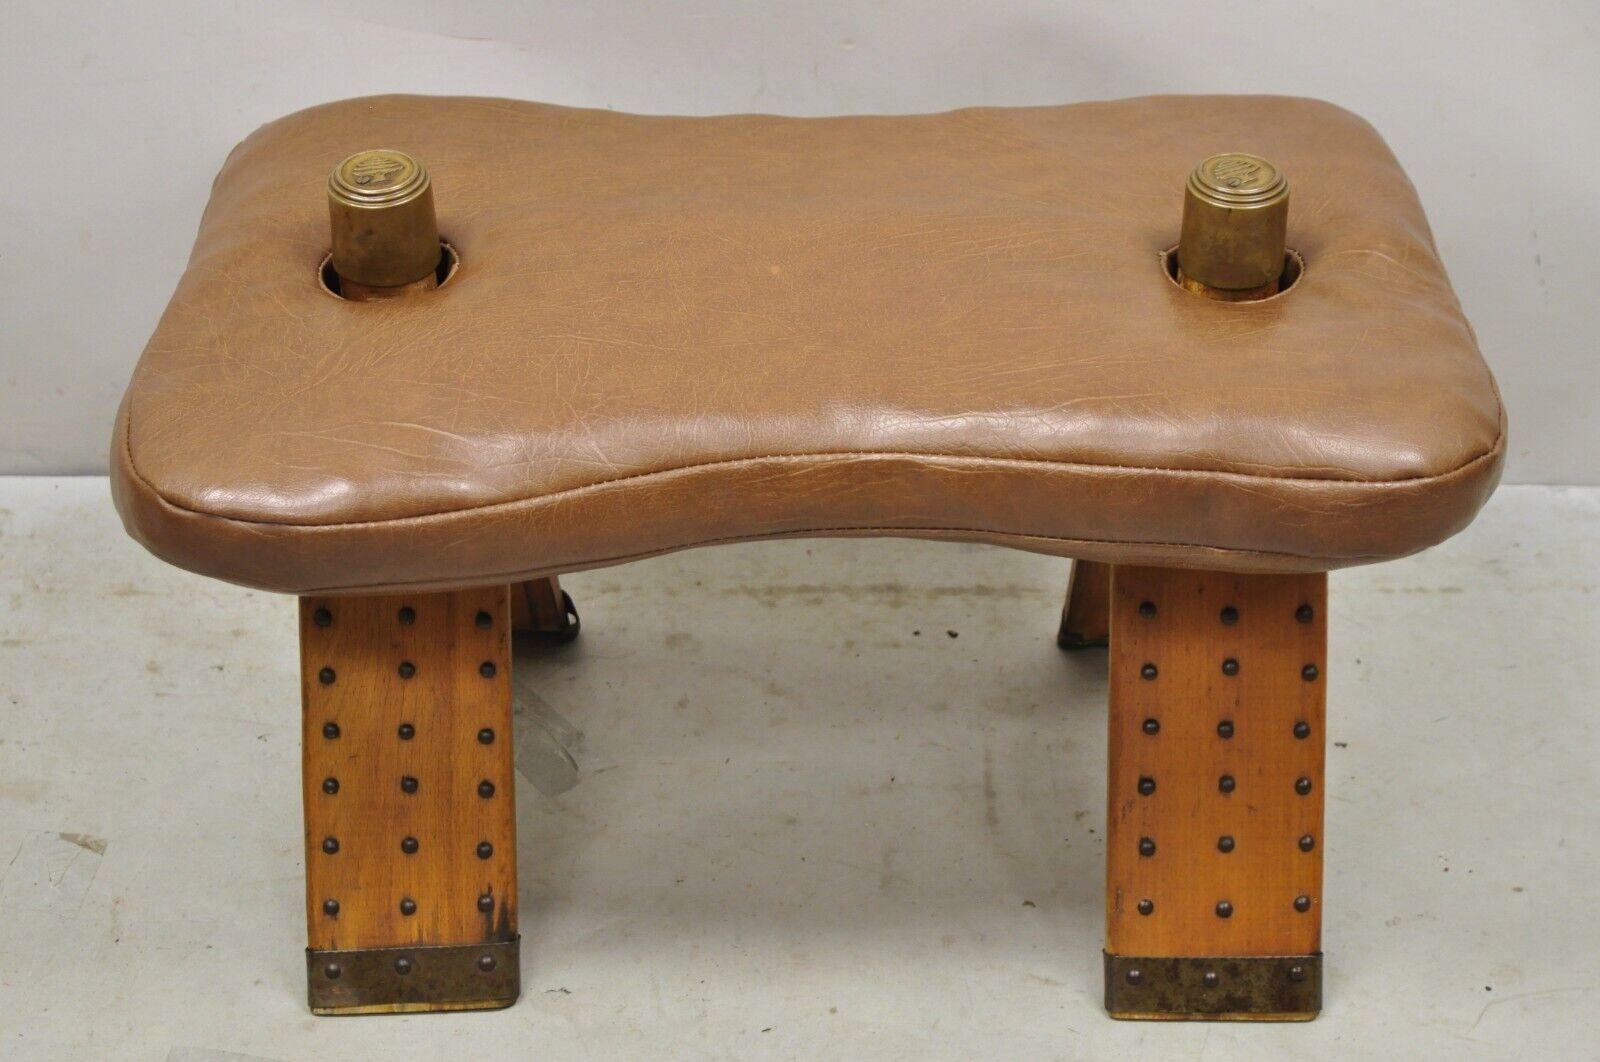 Camel Saddle, Bench or Stool, Cushion, Carved Rosewood, Inlaid Marquetry